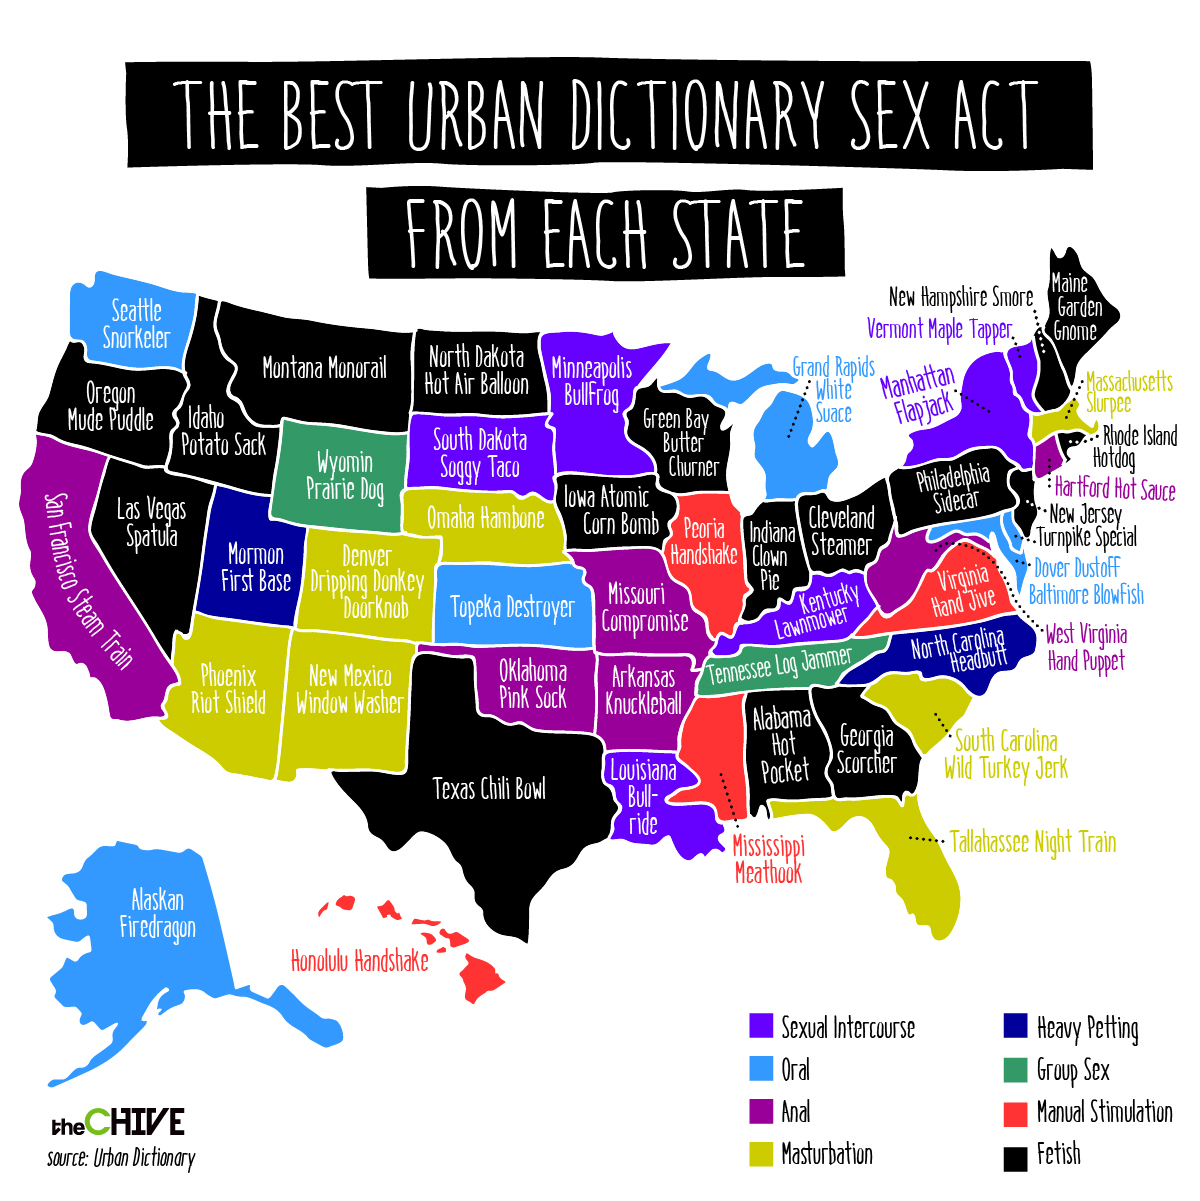 Heres The “Best” Urban Dictionary Sex Act From Each State  pic